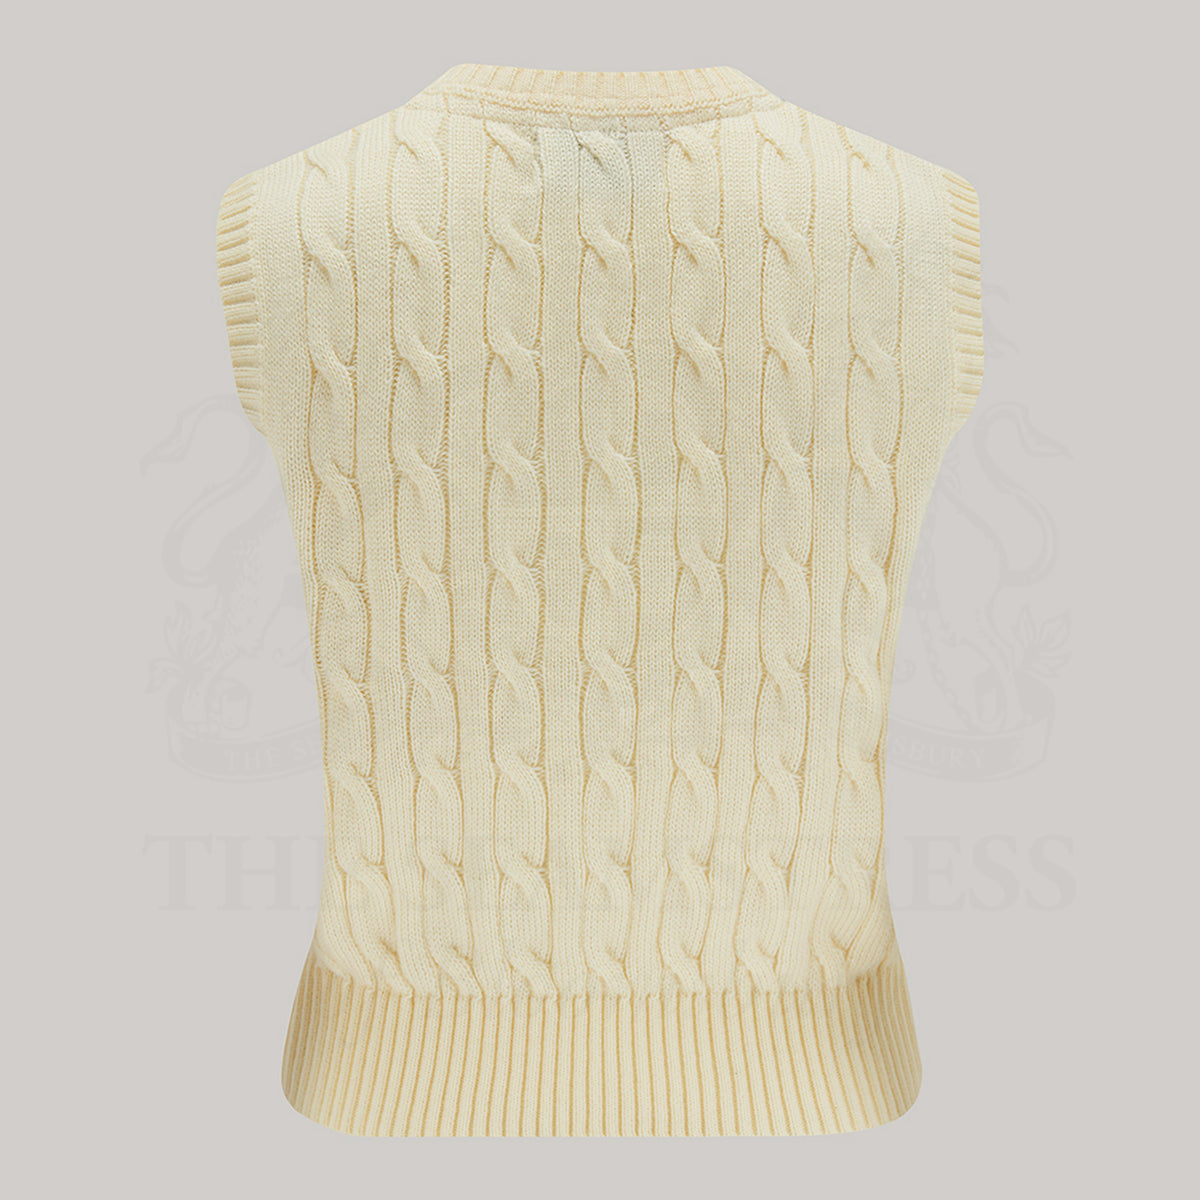 1940s style cable knitted slipover/vest in cream with a v-neck neckline.